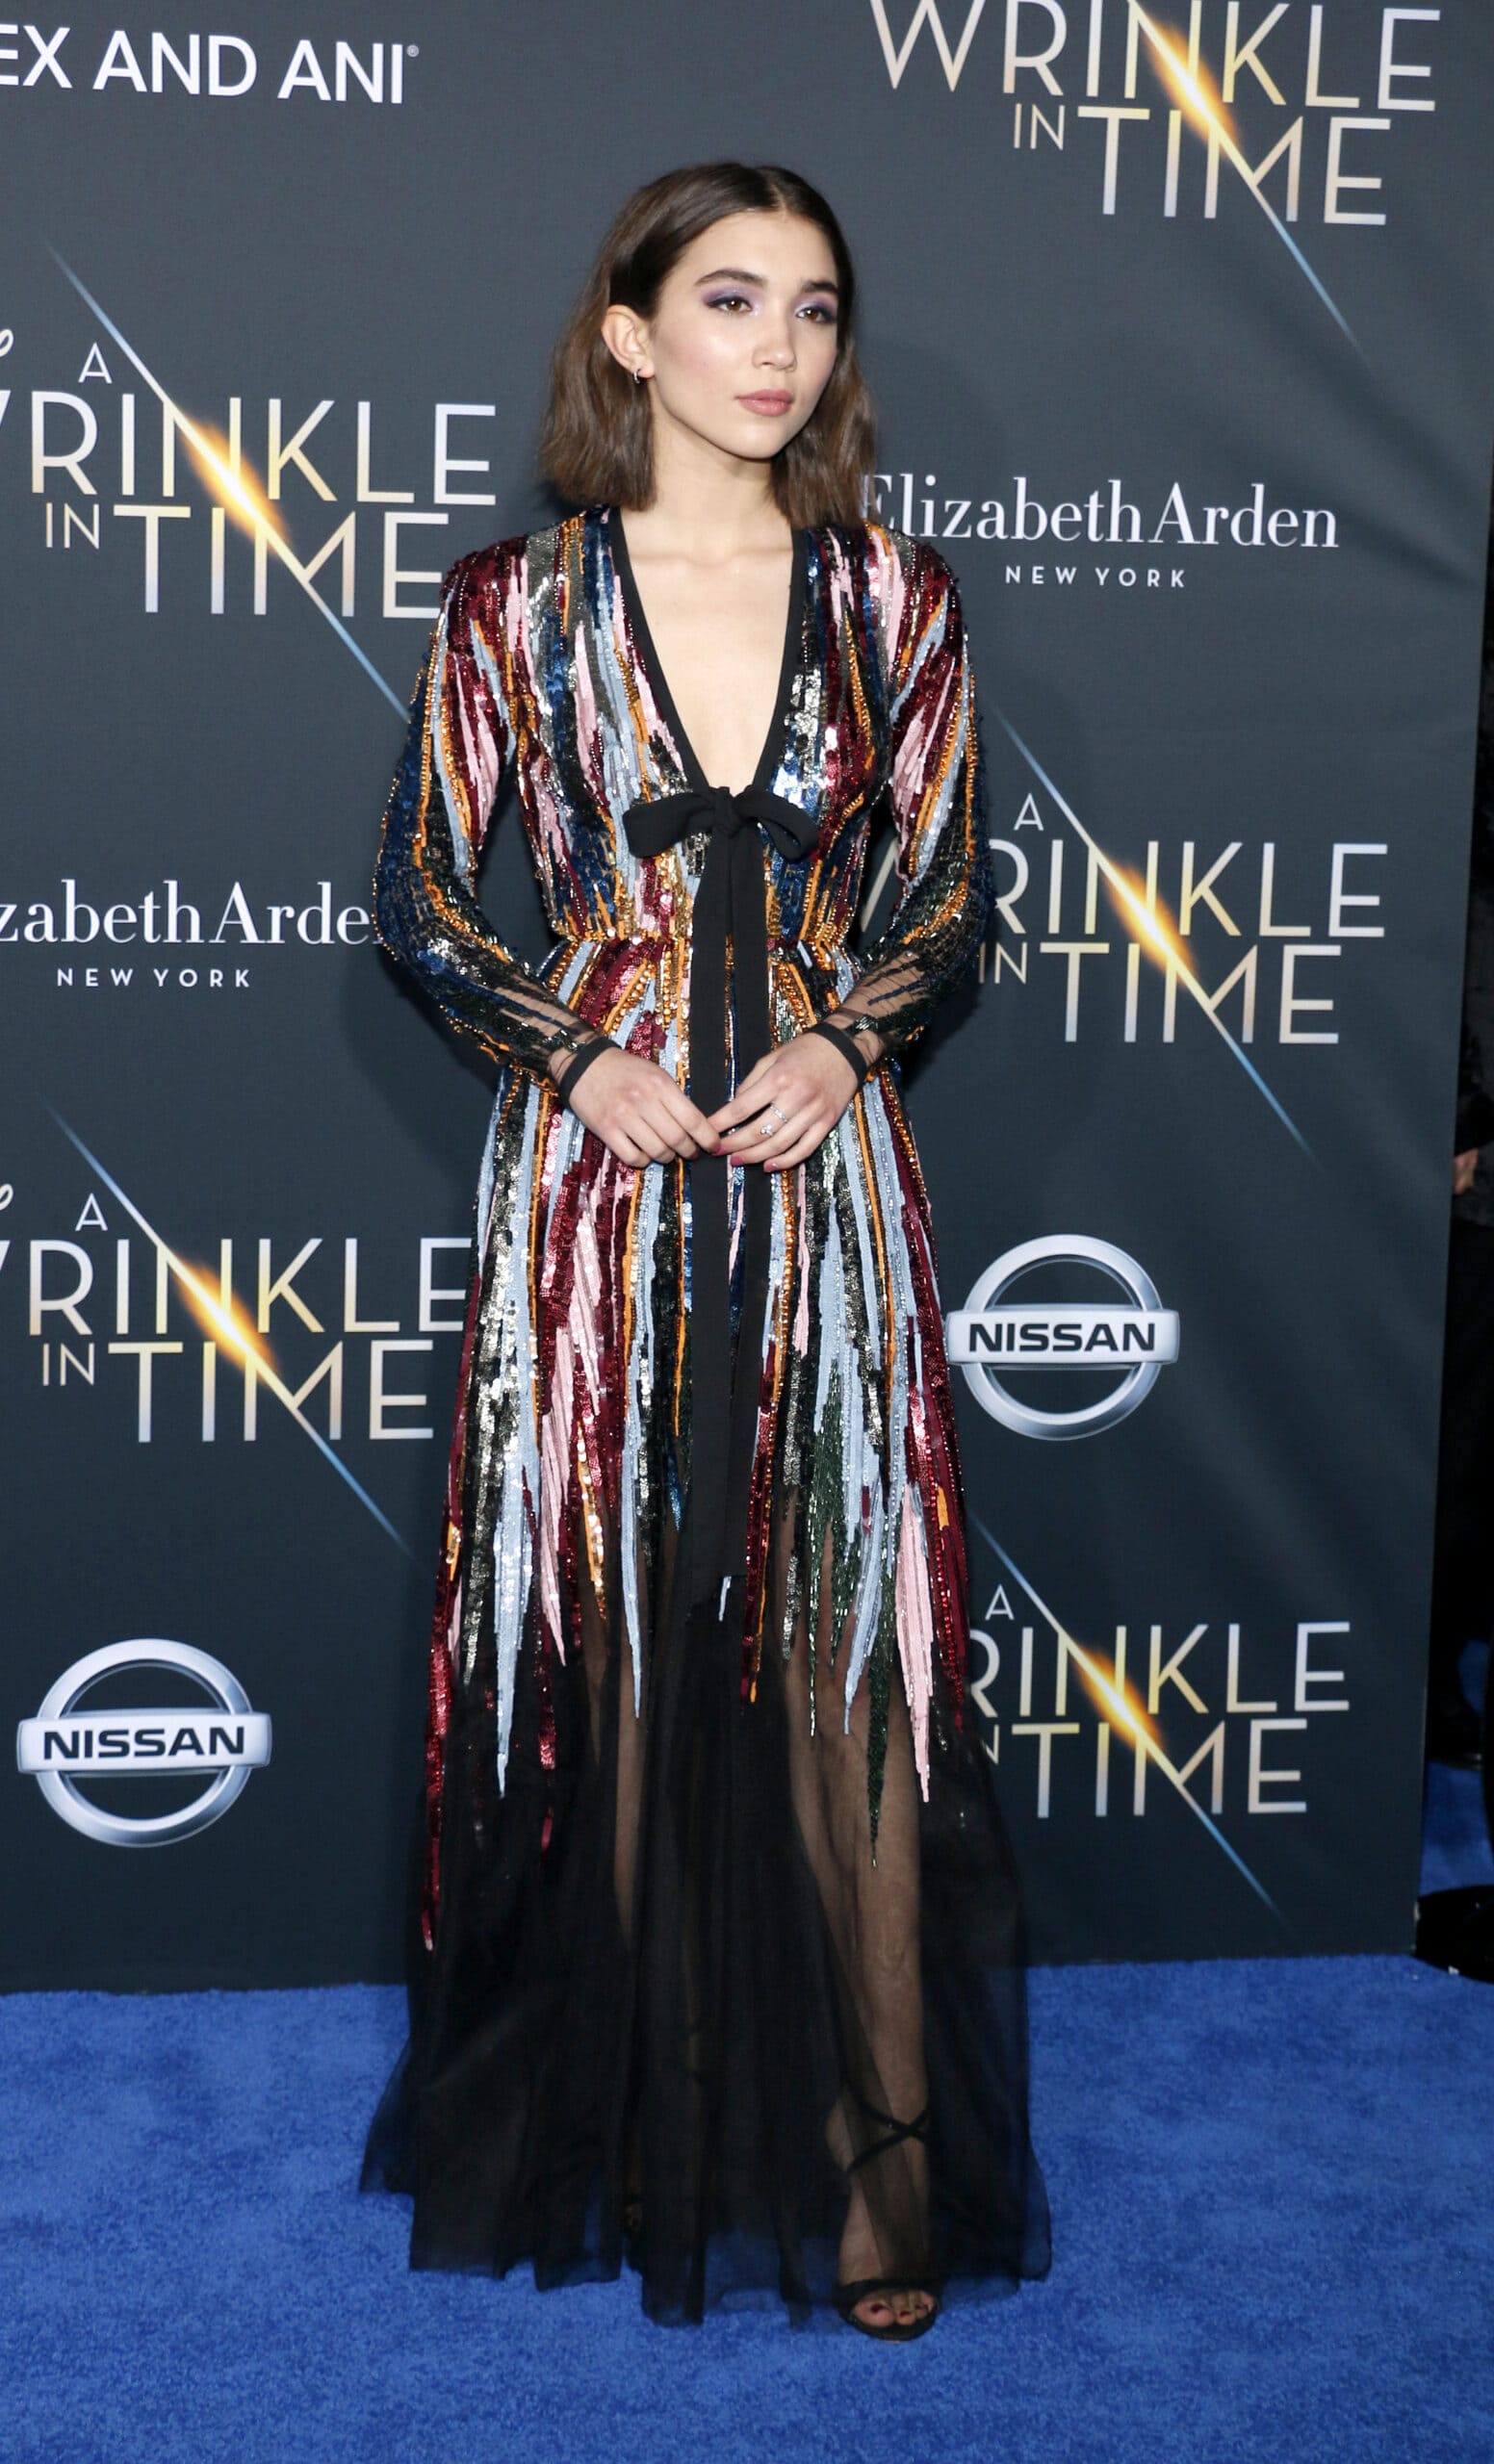 Rowan Blanchard at the Los Angeles premiere of 'A Wrinkle In Time'